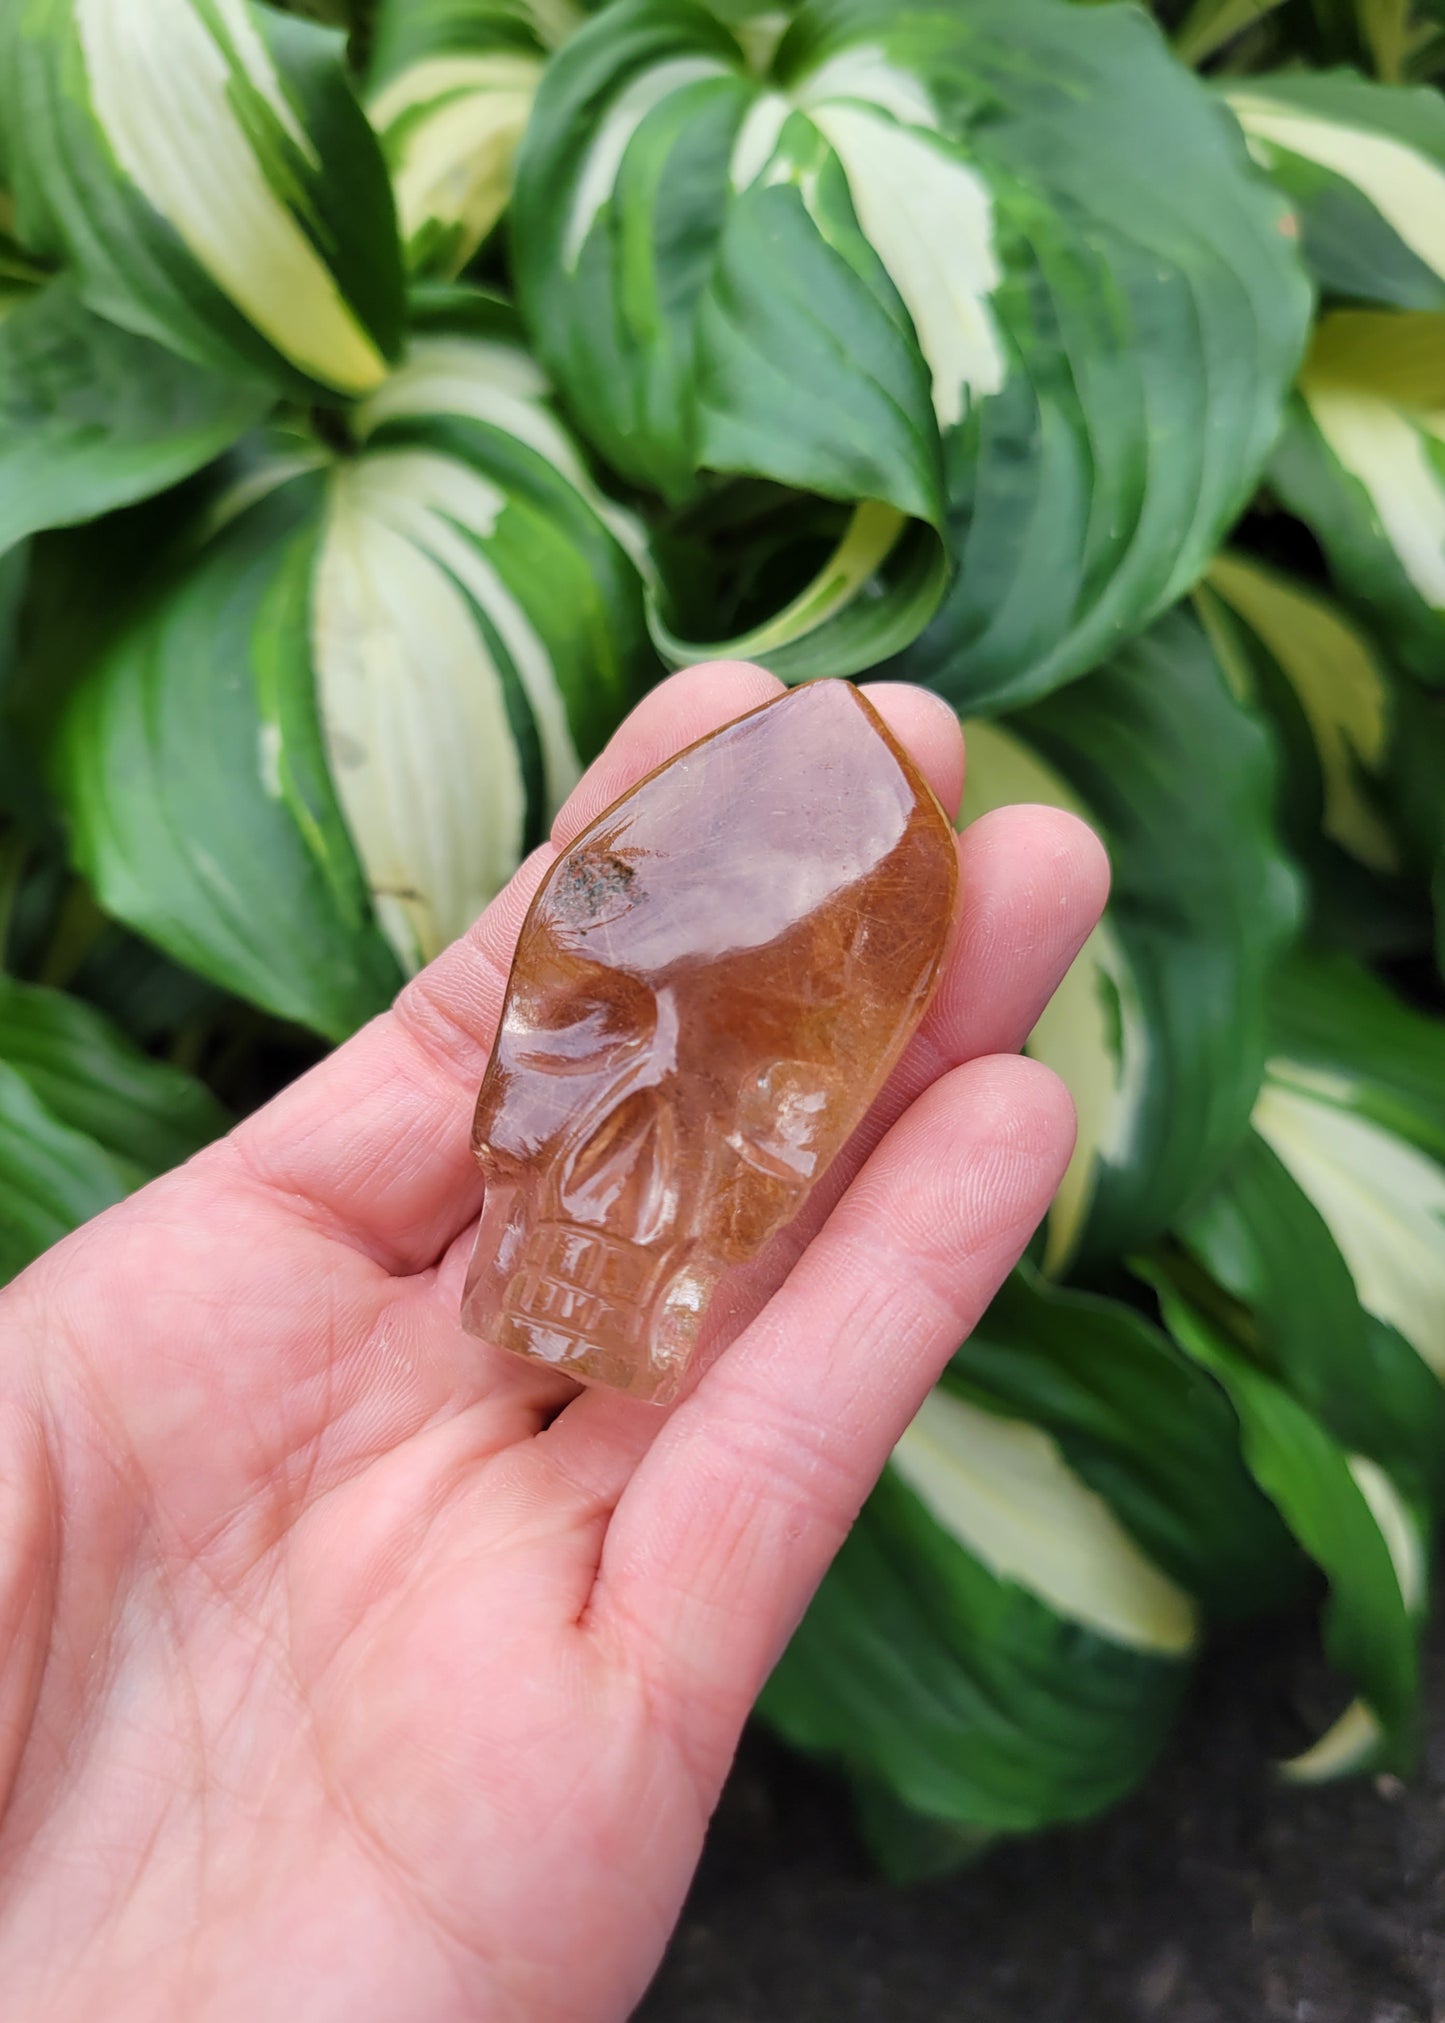 Himalayan Rutilated Quartz Skull Carved and Polished by Subhash Meena (W 1 1/4 X D 1 1/8 X H 2 1/4 inches, 52.3 grams)